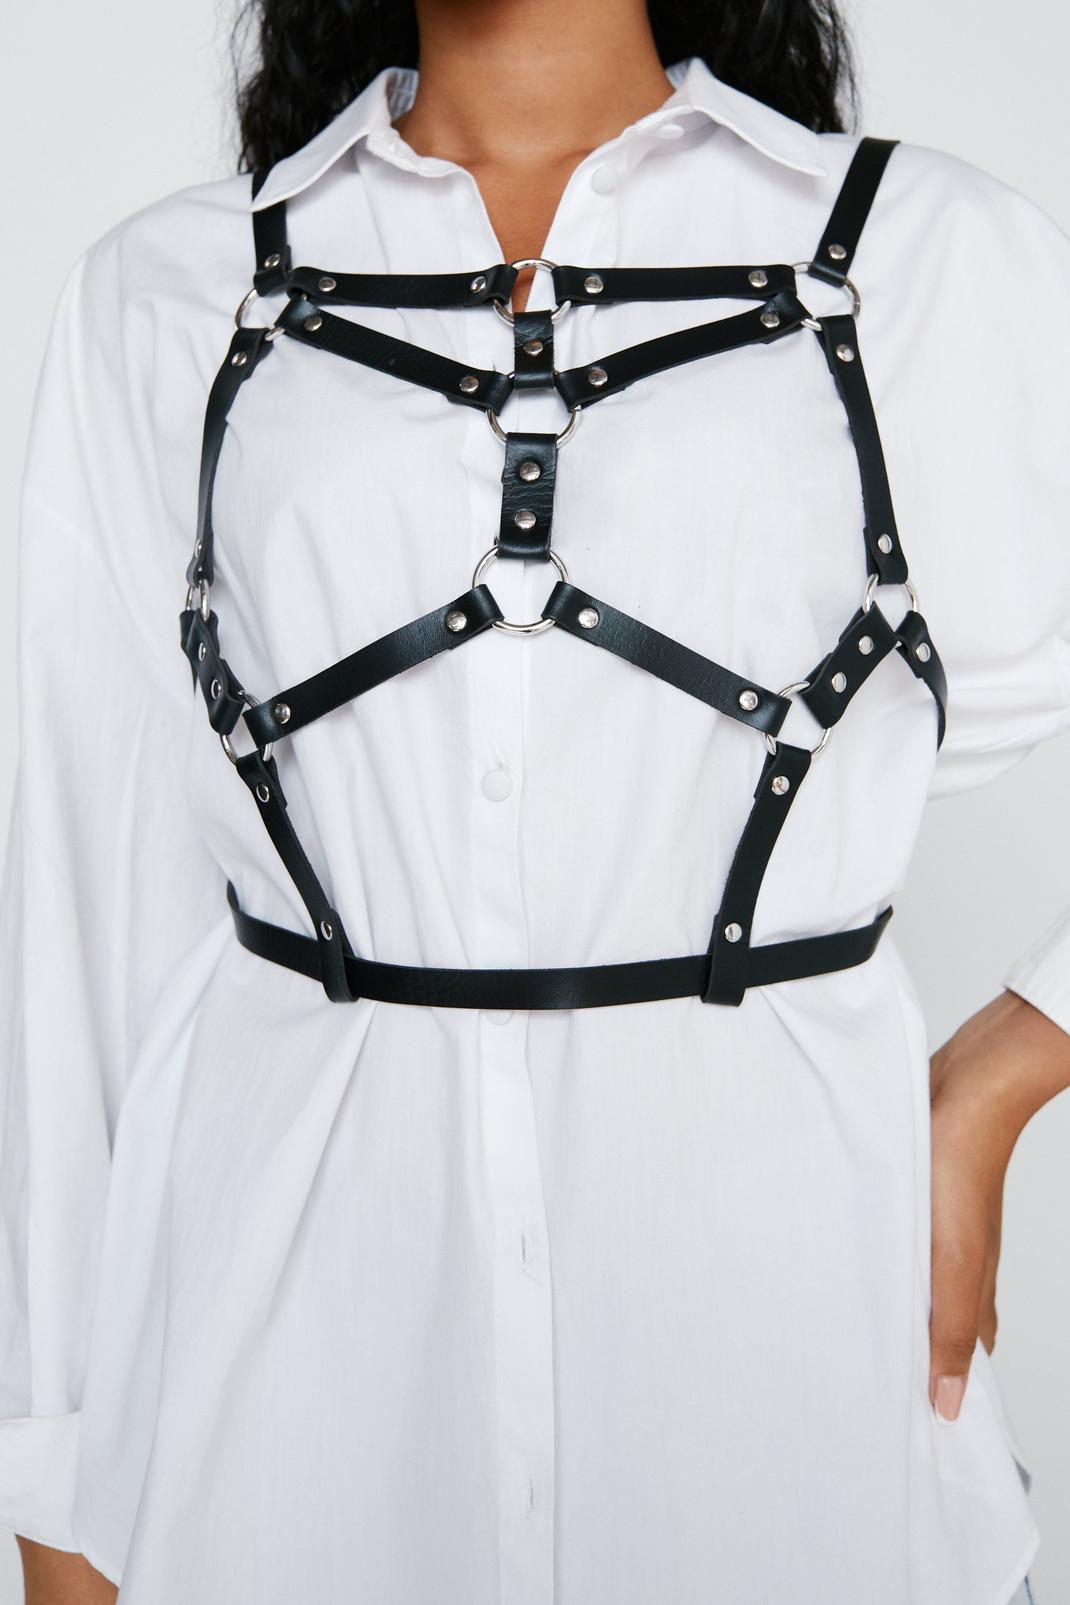 Black Faux Leather Body Harness image number 1